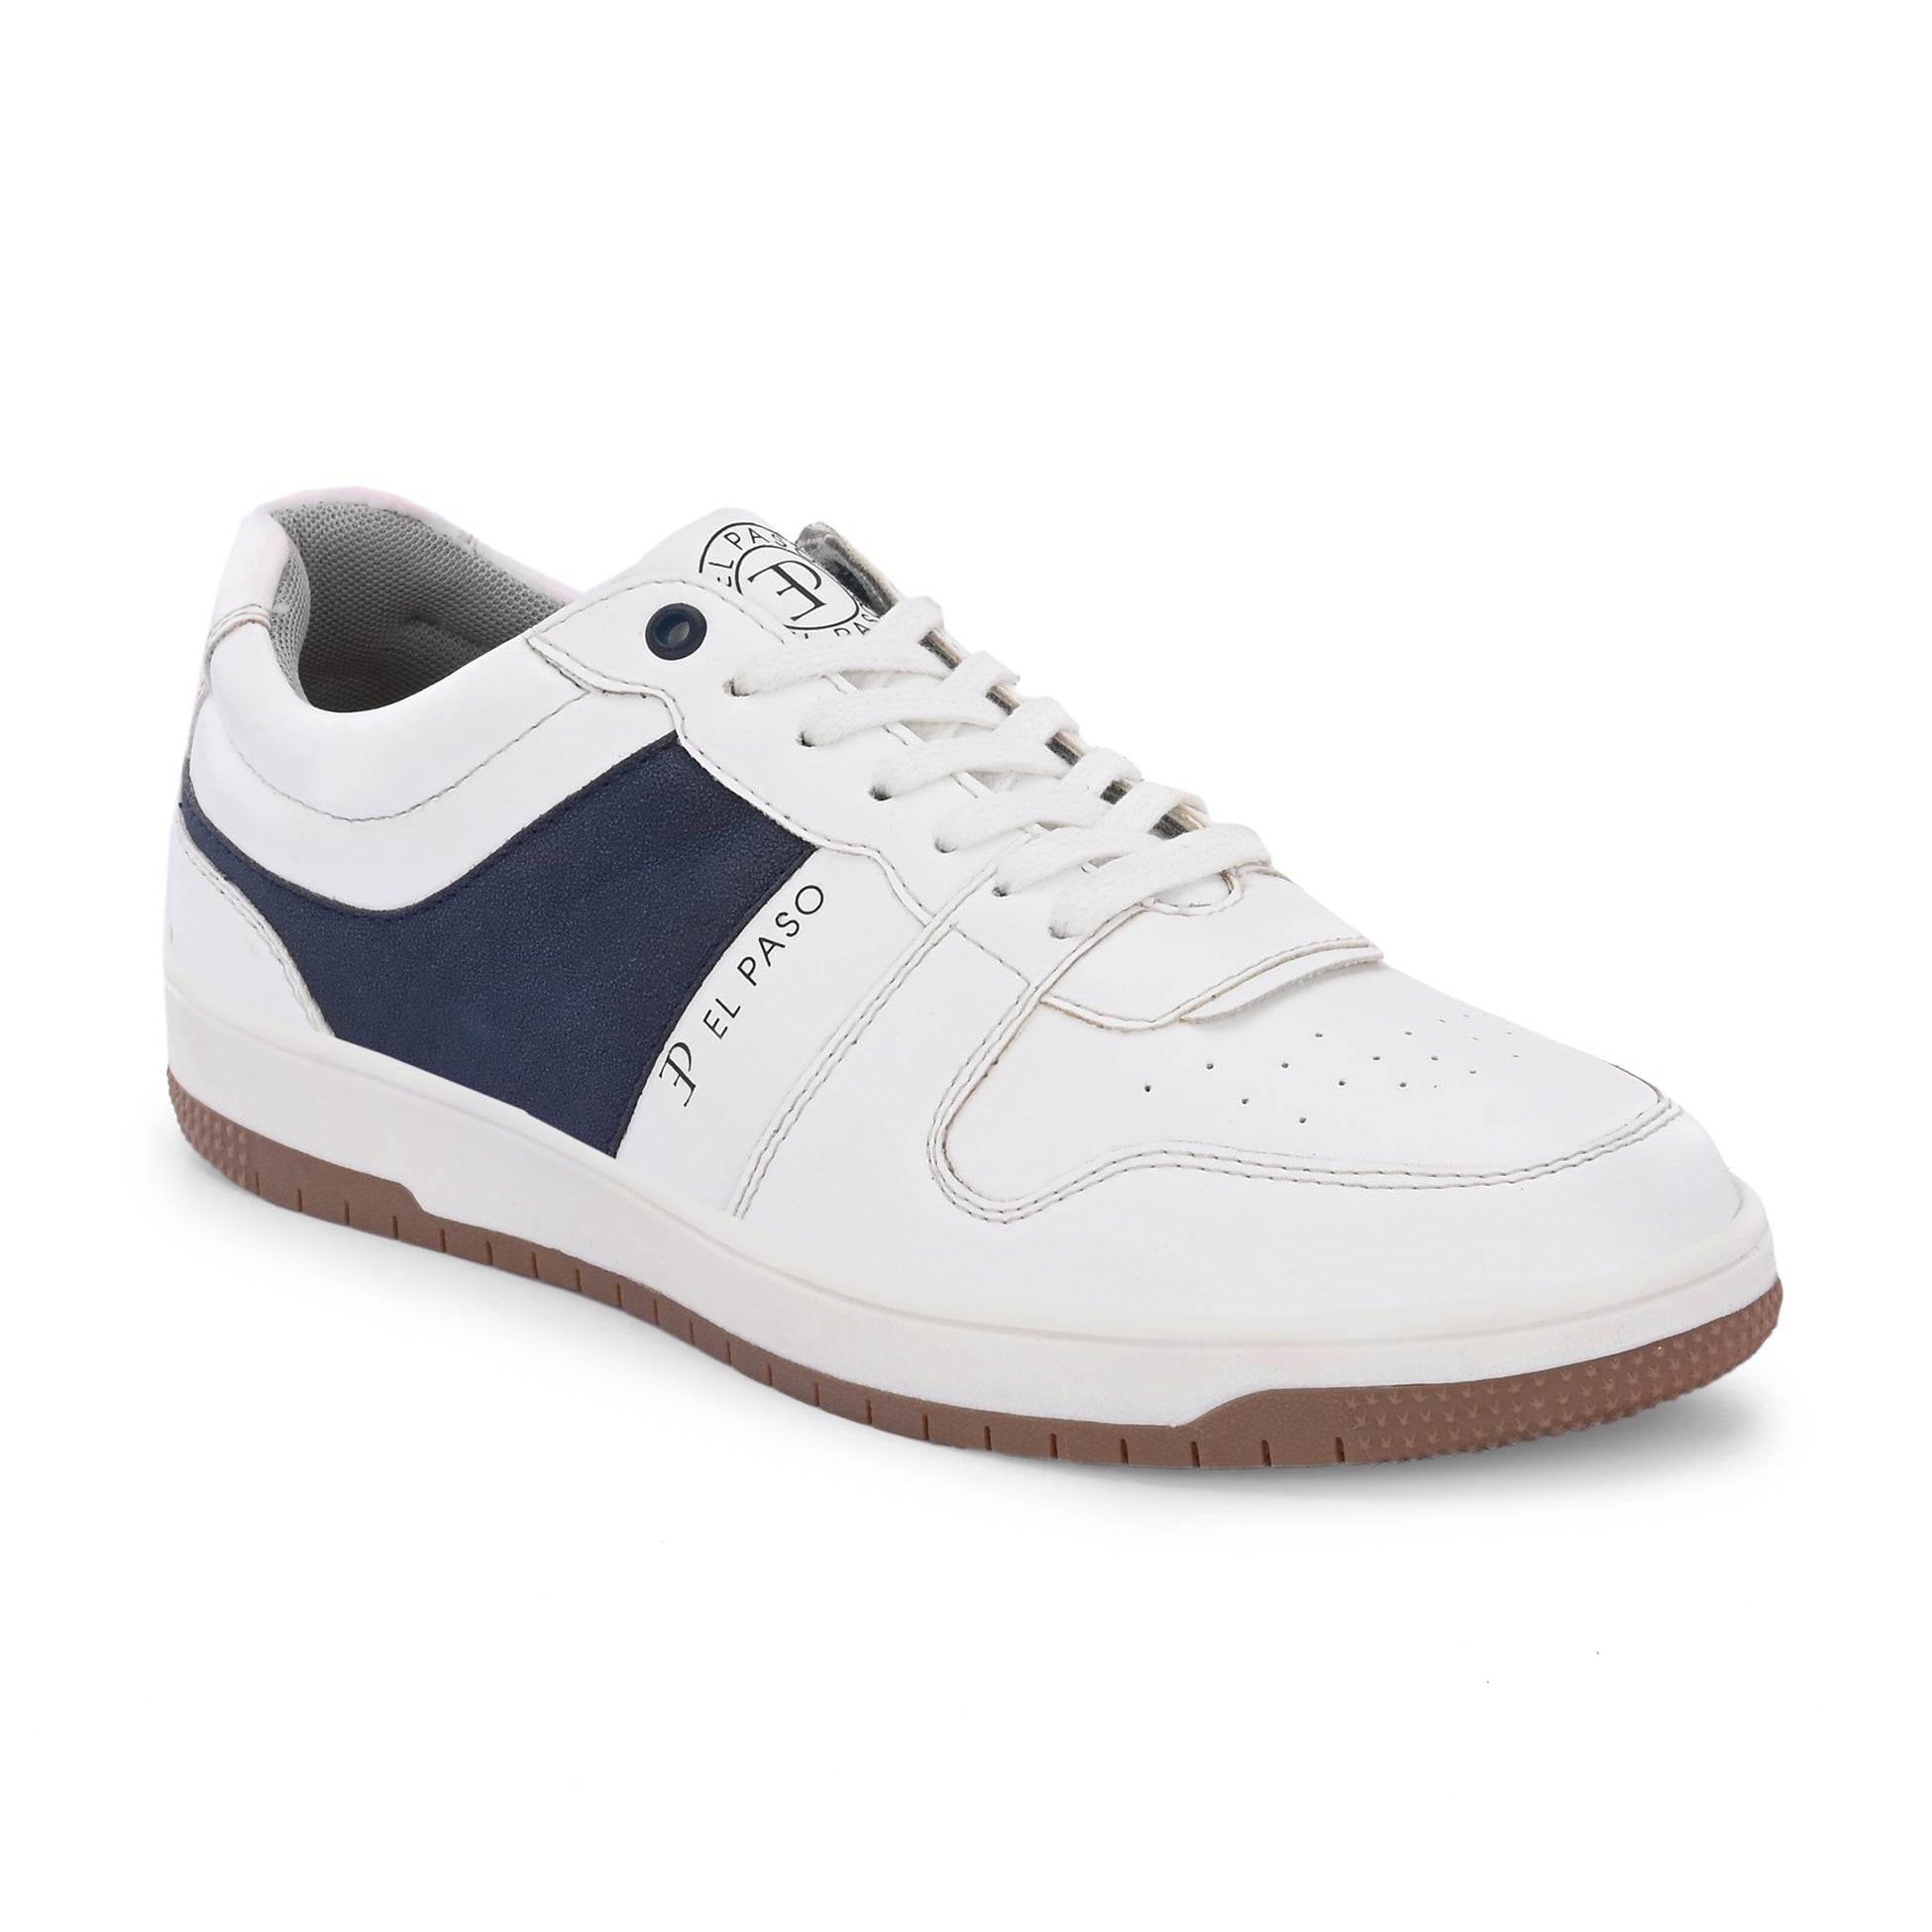 White & Blue Men's casual lace-up sneakers with white laces.